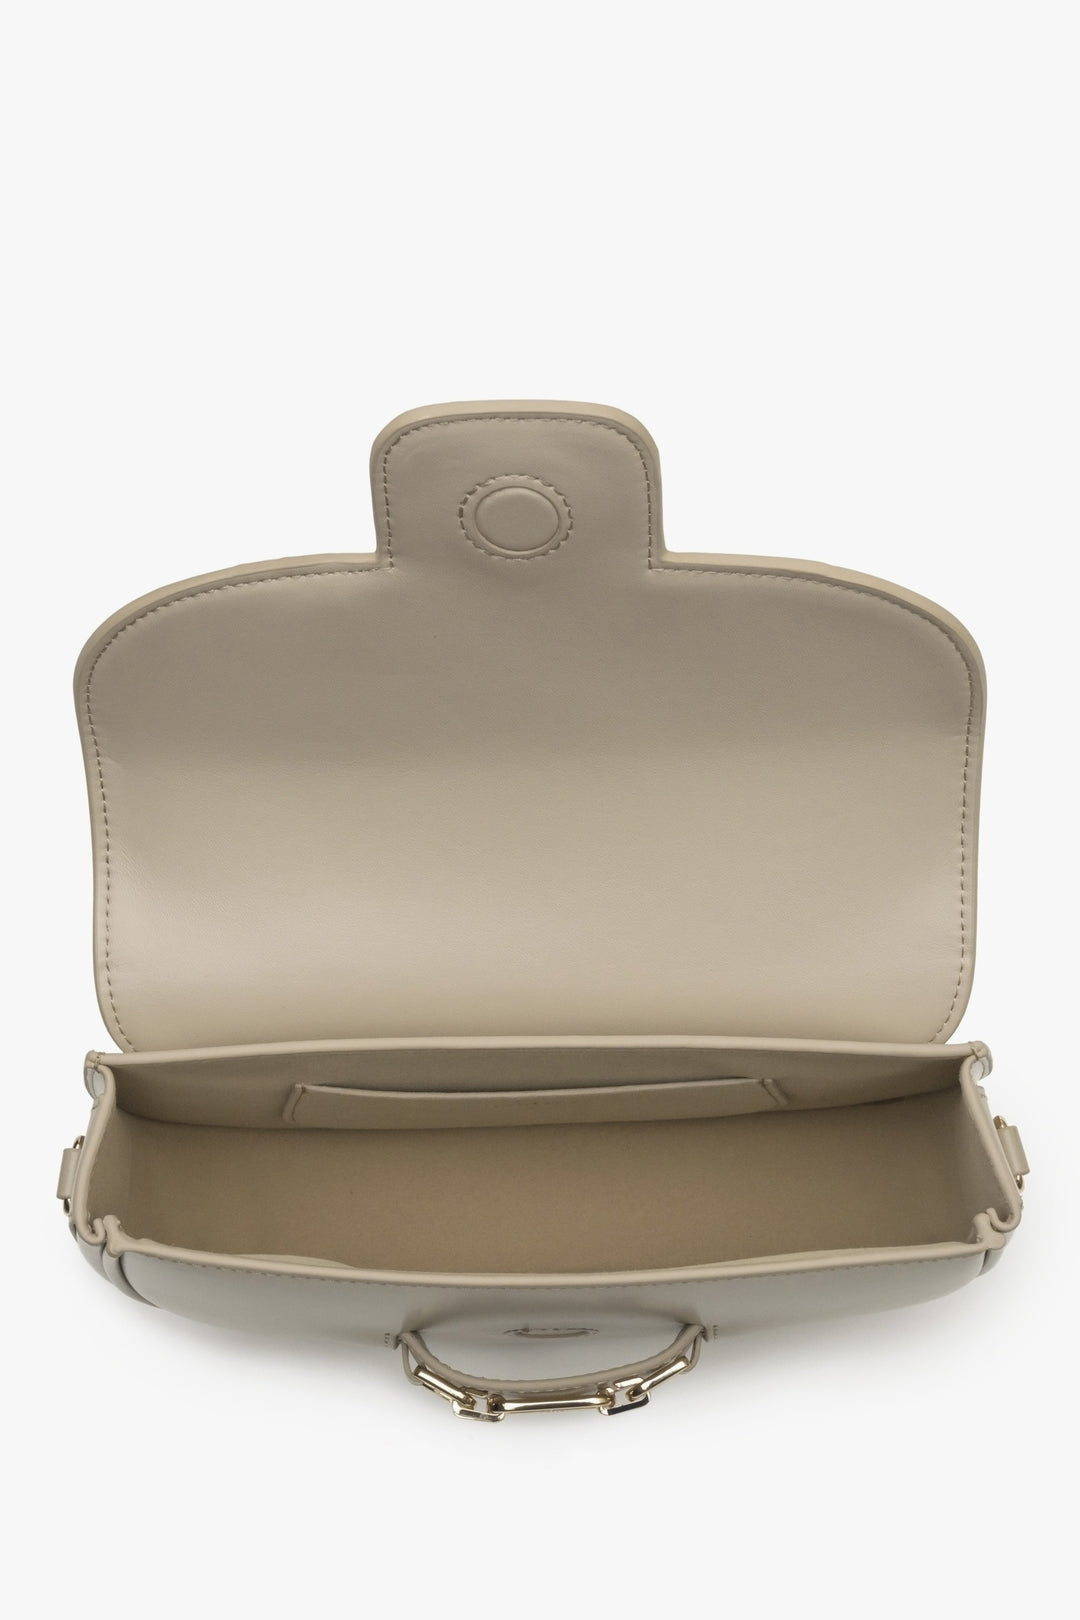 Estro women's grey and beige bag with adjustable strap - close-up of the interior.